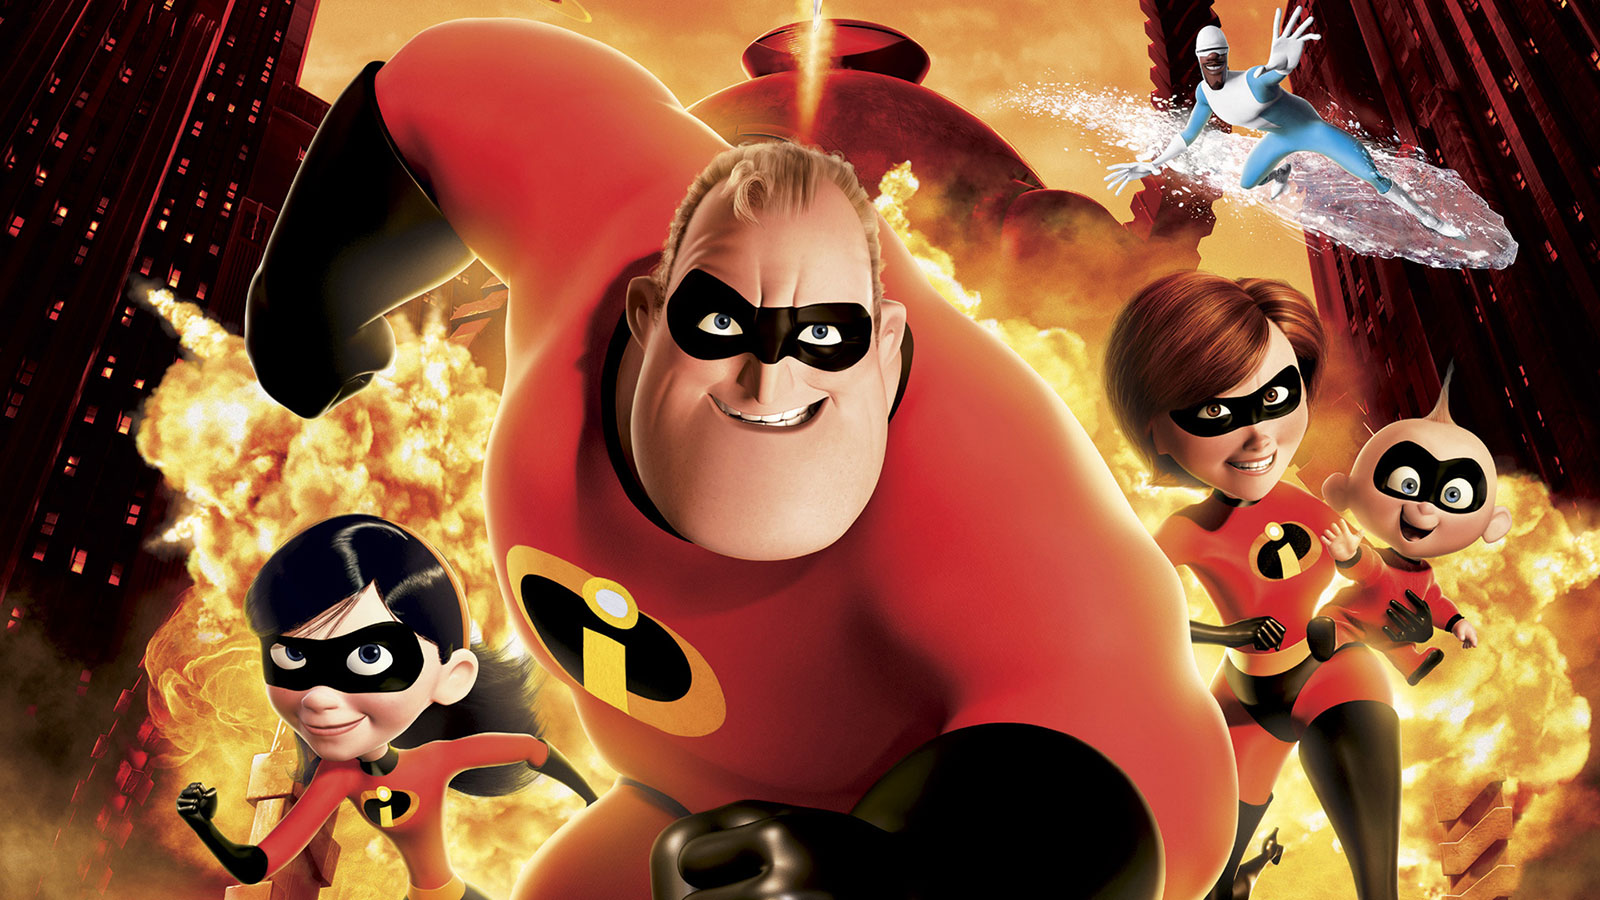 I Bet You Can’t Identify More Than 10/15 of These Pixar Movie Foods The Incredibles